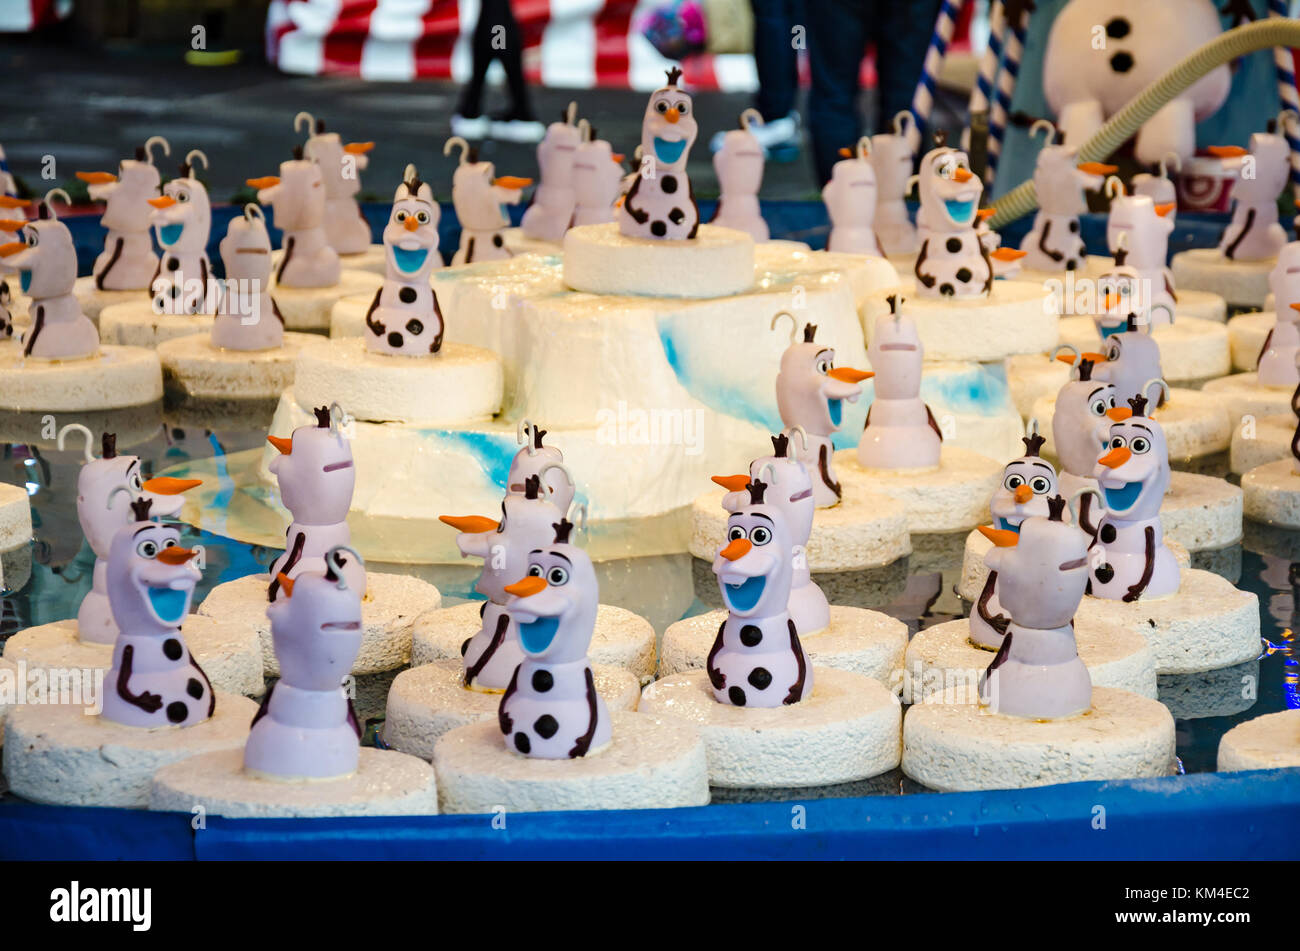 A 'hook-a-duck' style game at a fairground stall featuring the snowman character Olaf from the Disney Film 'Frozen'. Stock Photo